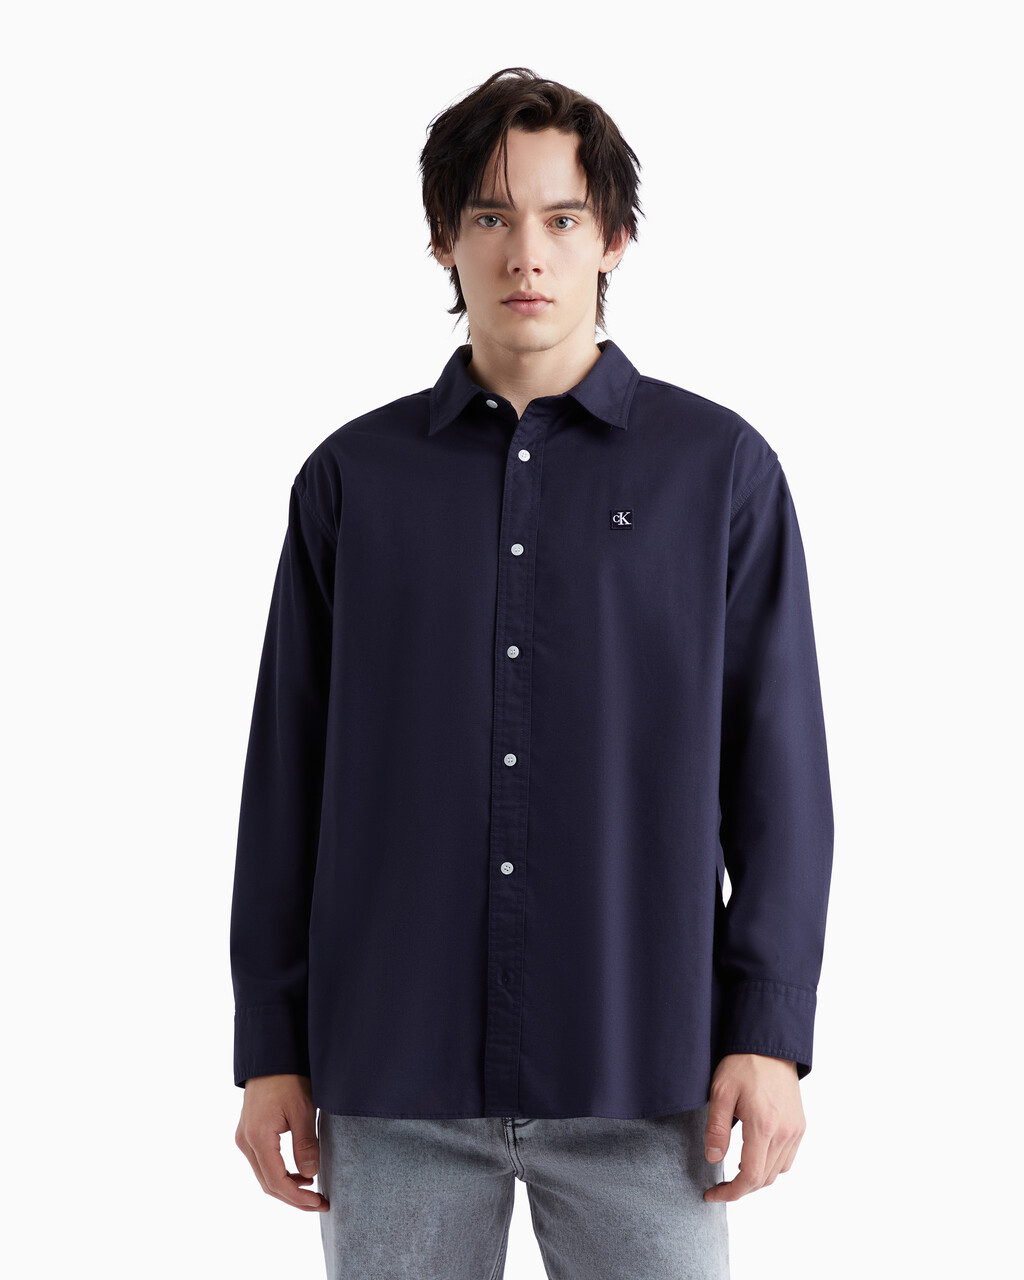 Fast Track Coolmax Oxford Relaxed Shirt, NIGHT SKY, hi-res